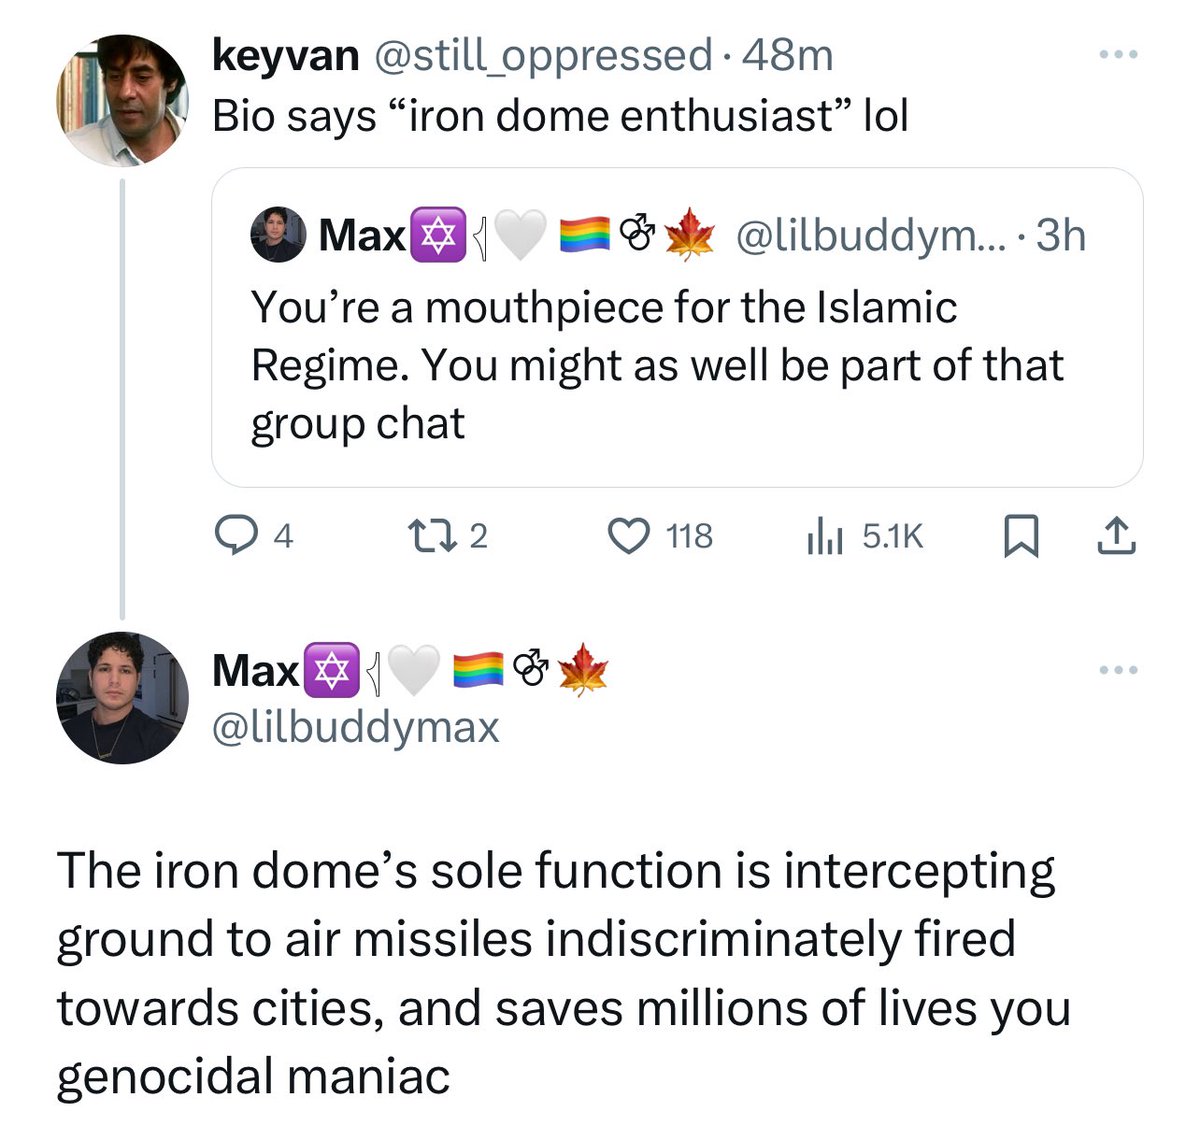 It’s always interesting when a hardcore Zionist says “I’m grateful for the Iron Dome because it stops the indiscriminate bombing of cities.” Okay. That’s great. So you oppose the indiscriminate bombing of cities?